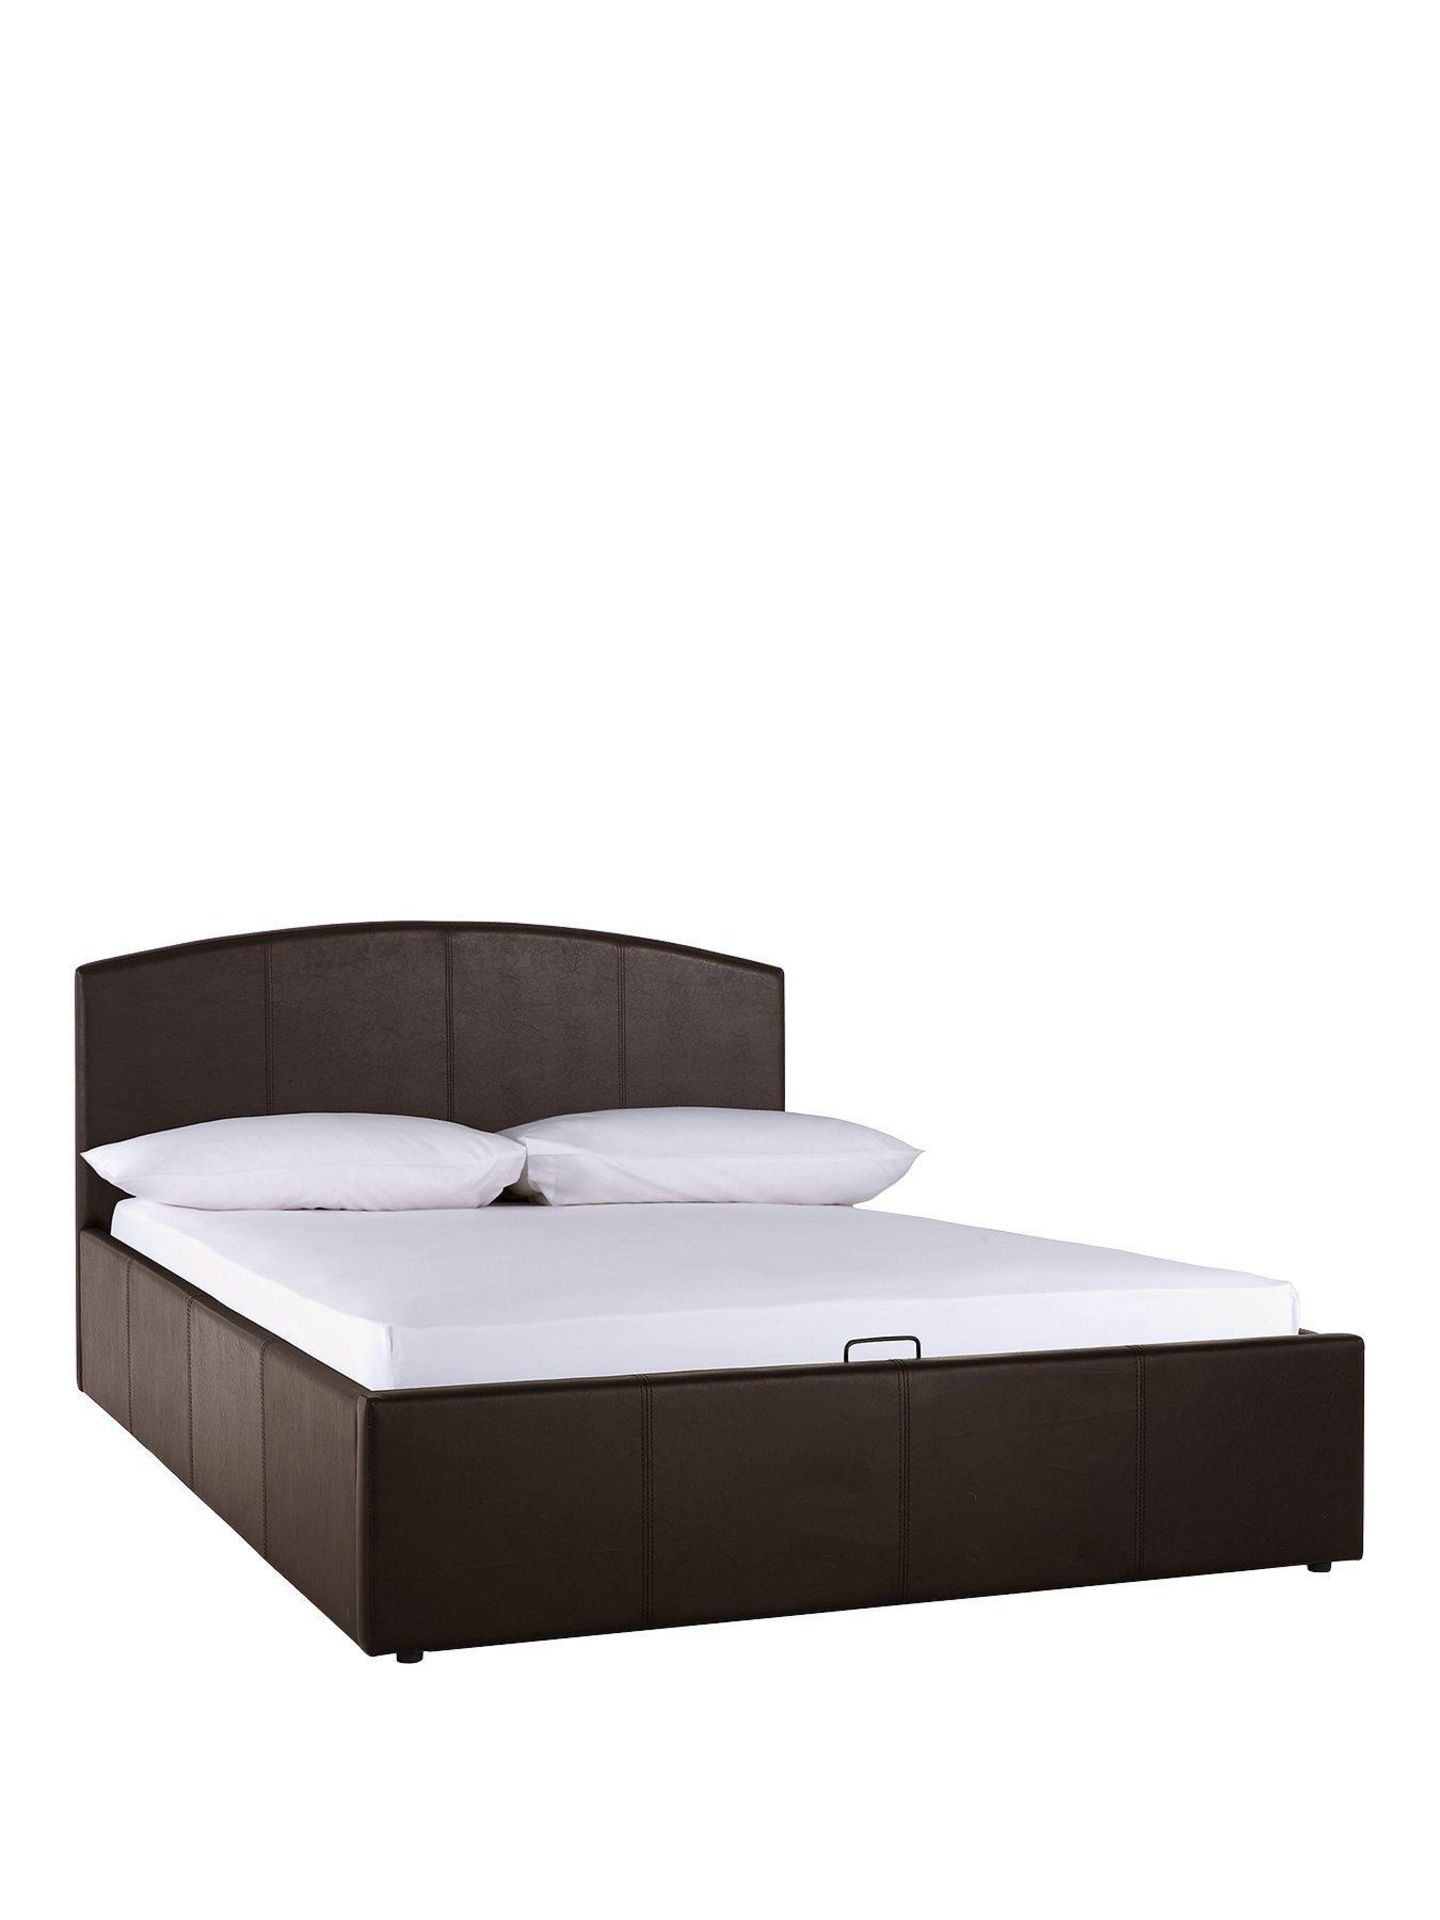 Boxed Item Marston Double Lift-Up Bed [Charcoal] 88X144X202Cm Rrp:£514.0